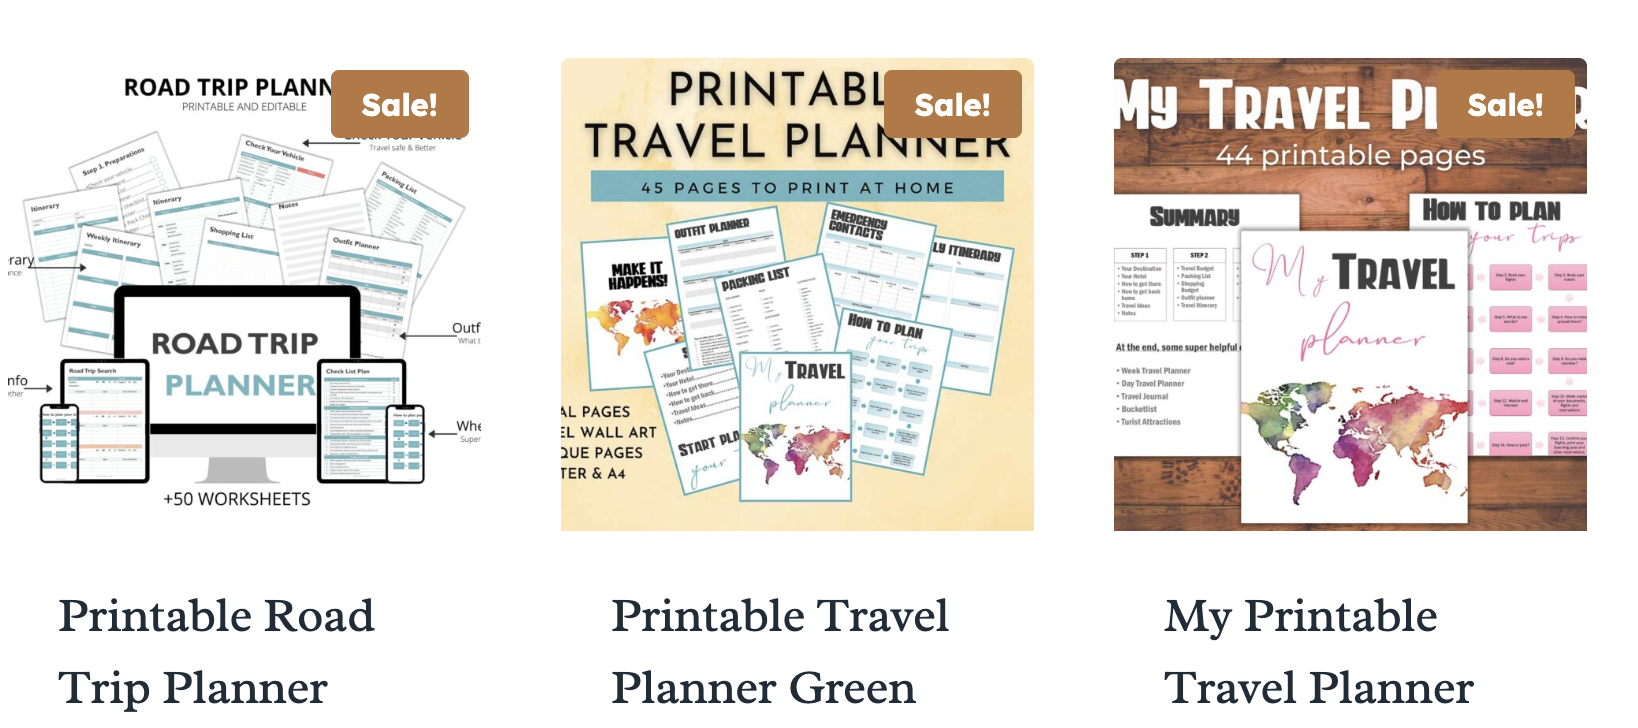 samples of printable travel planners